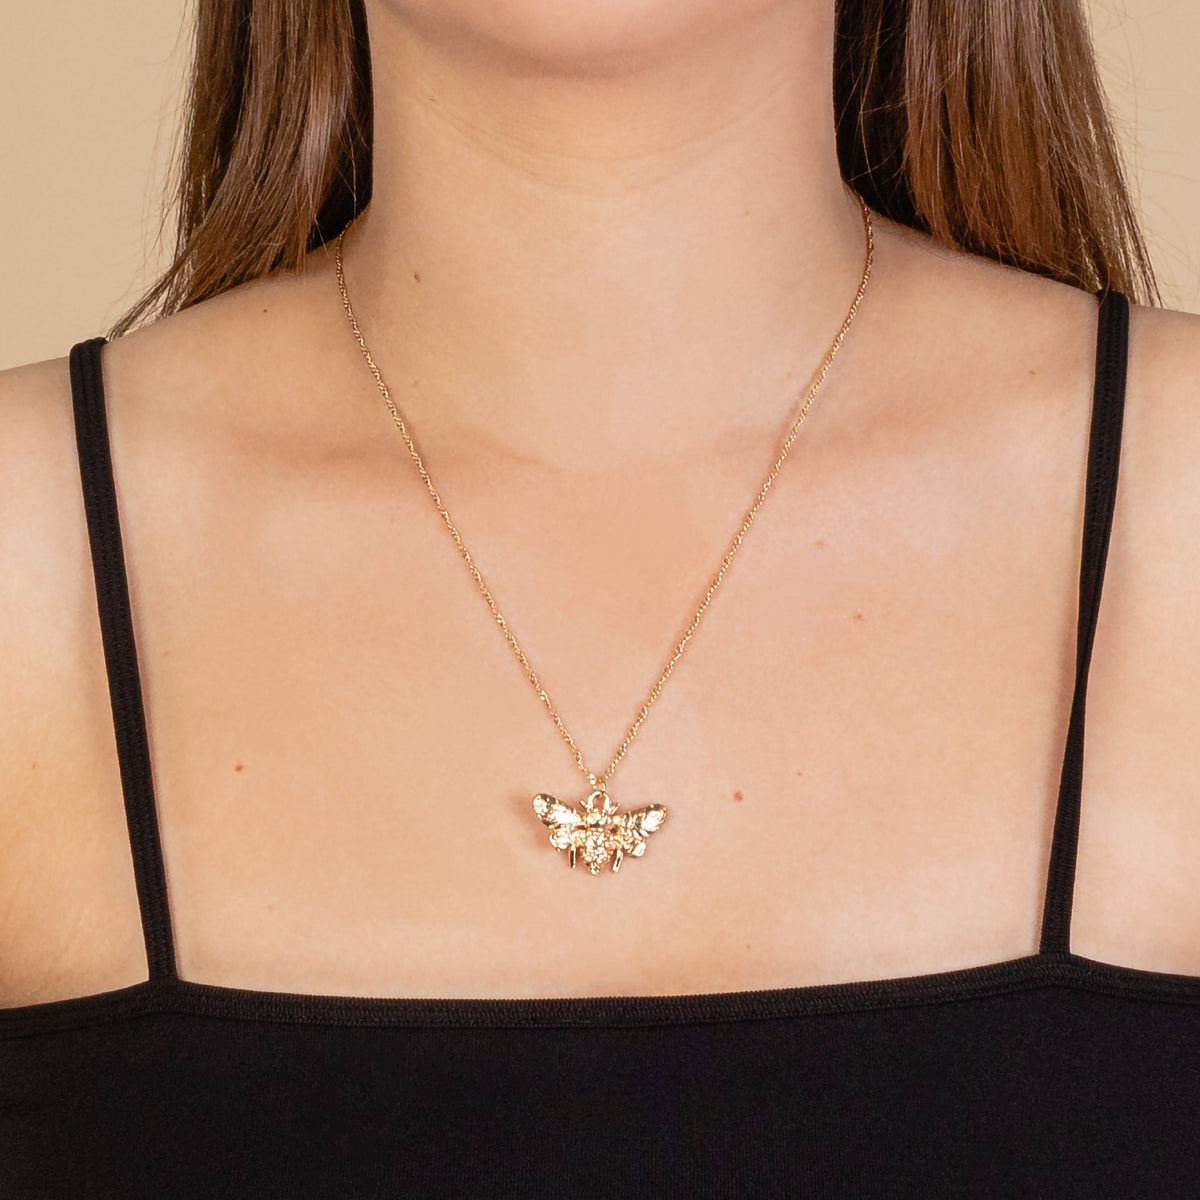 BUZZ - Dainty Bumblebee Necklace - Gold